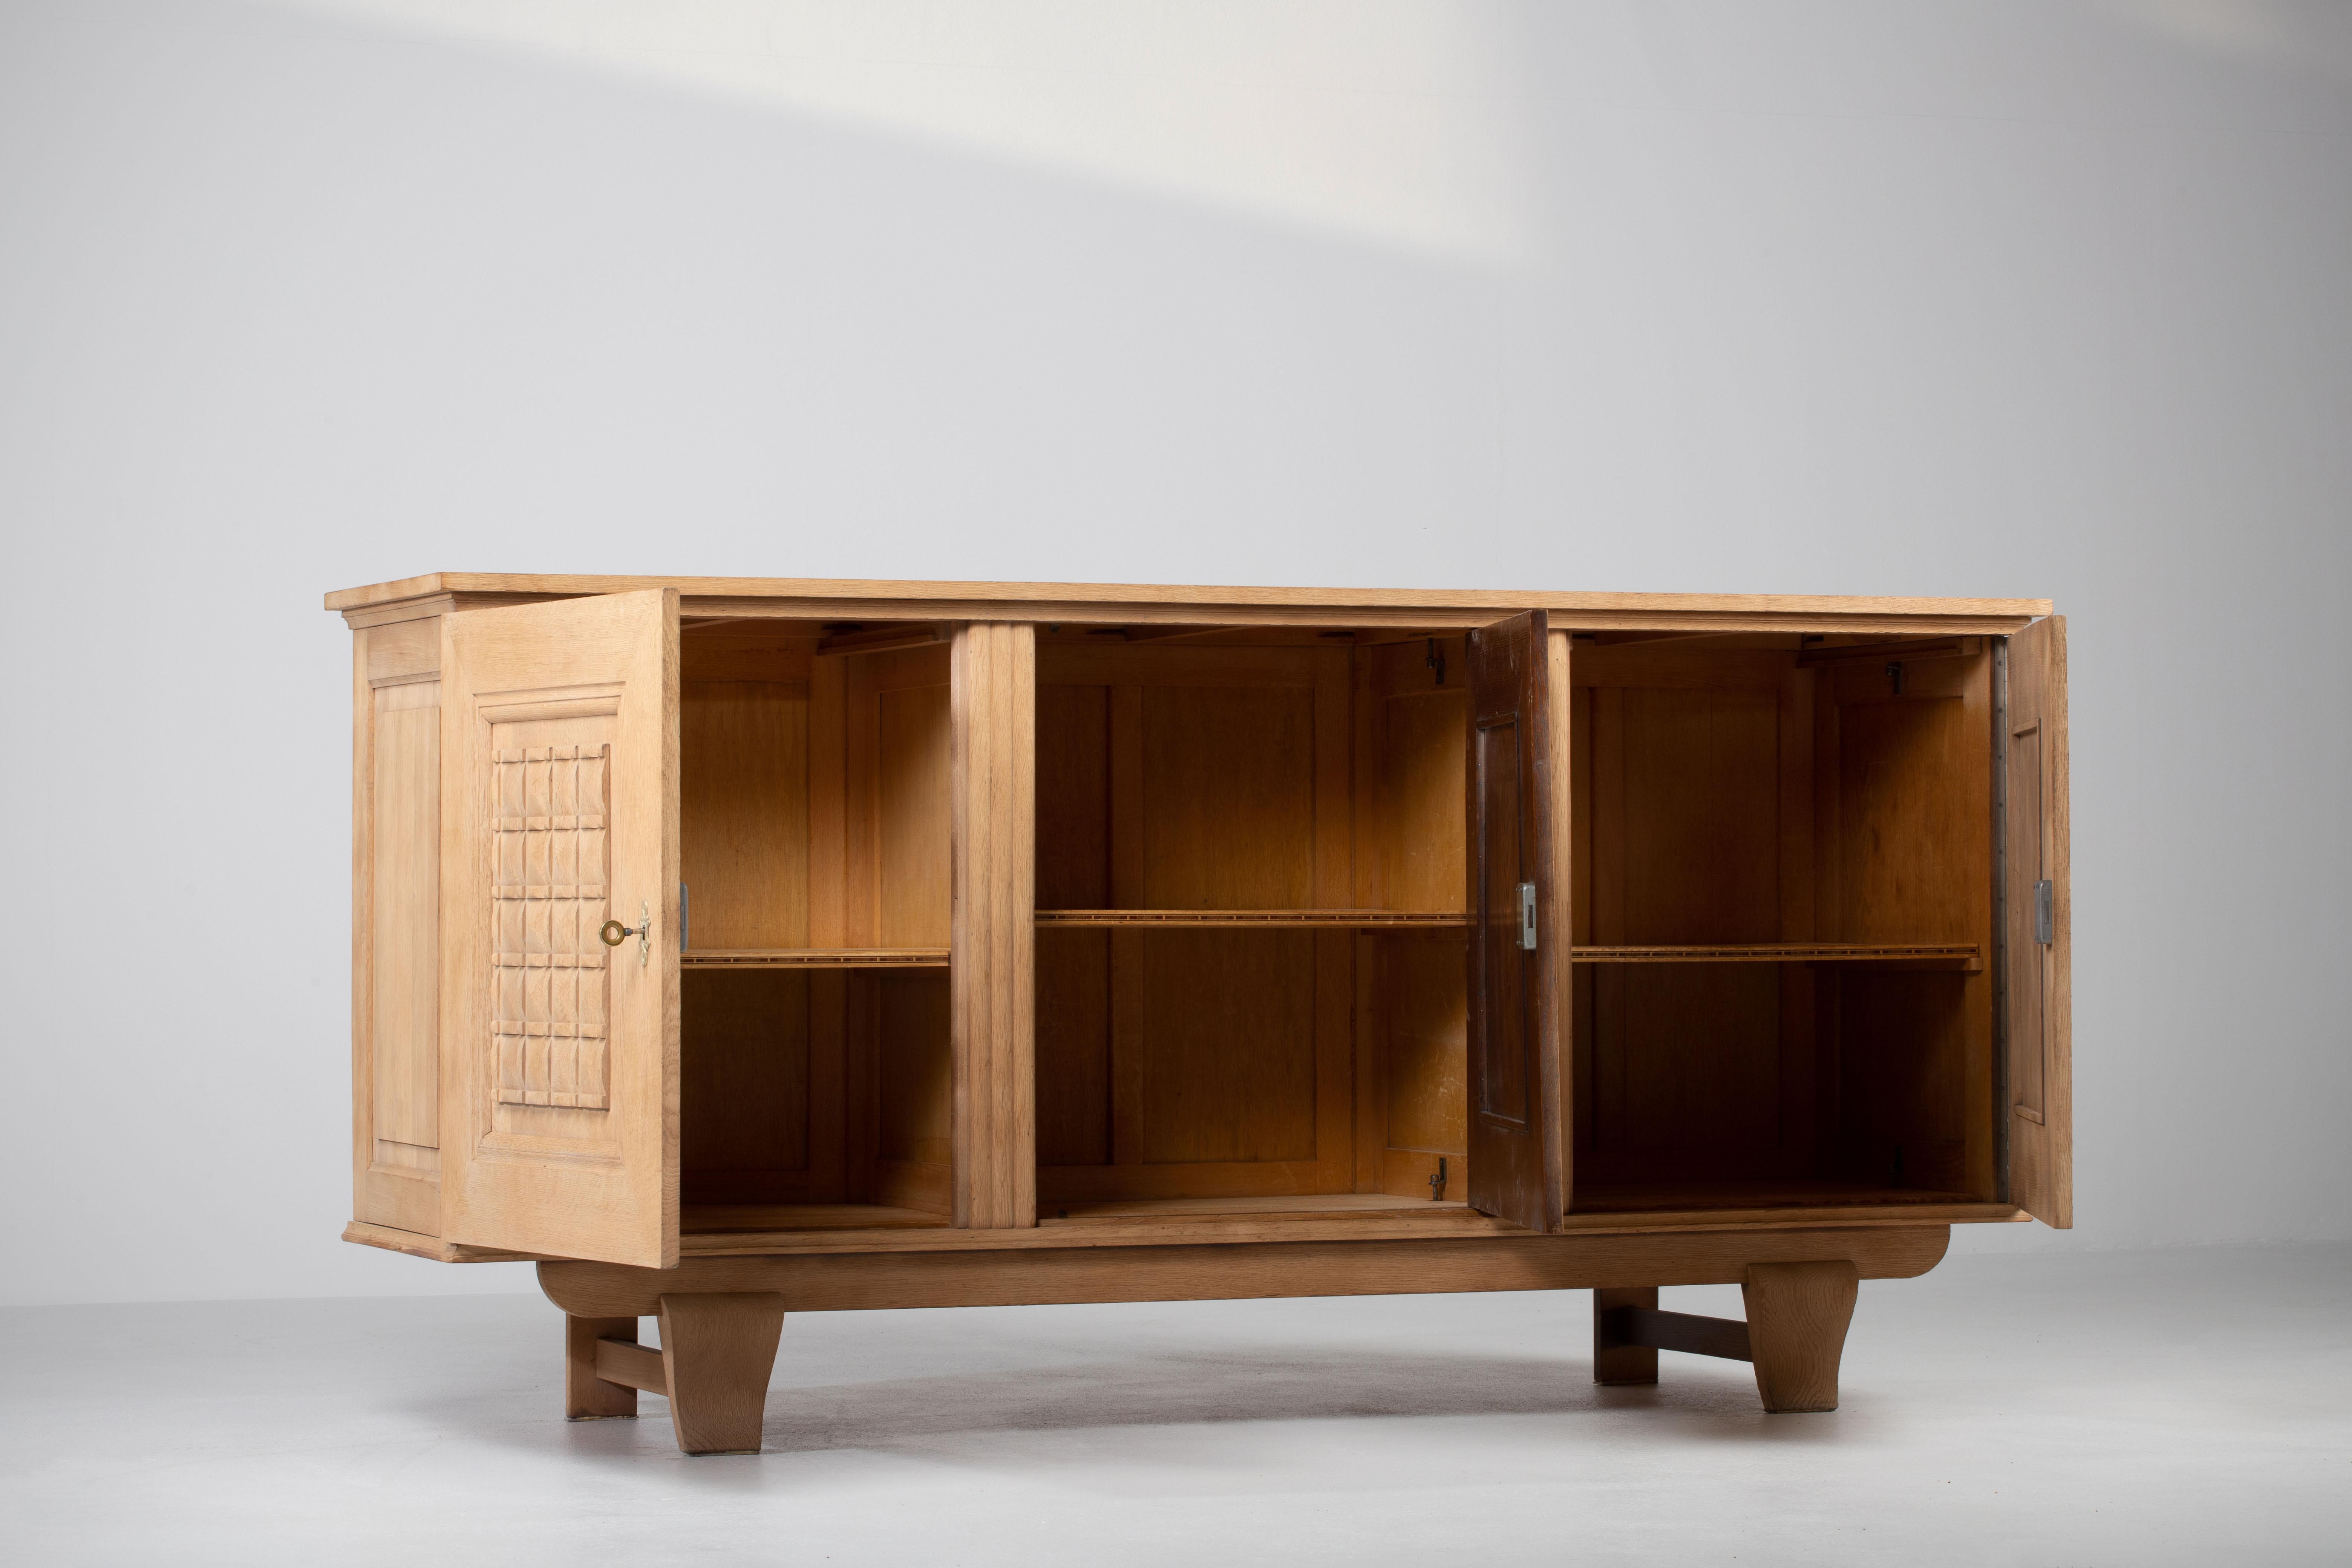 French Mid-Century Credenza in Solid Oak, Rustic, France, 1940s For Sale